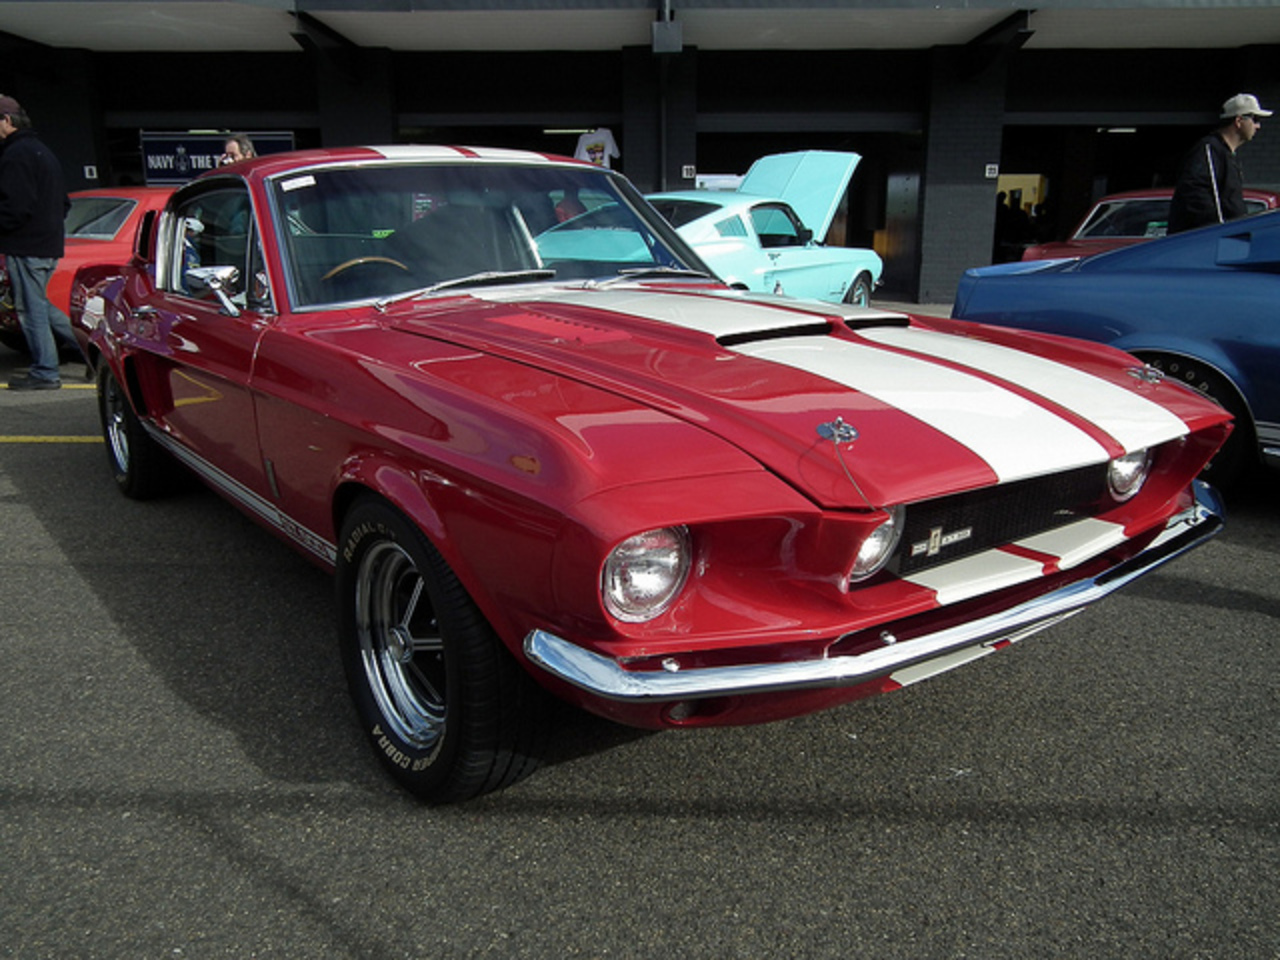 1967 Ford Mustang Shelby GT500 coupe | Flickr - Photo Sharing!